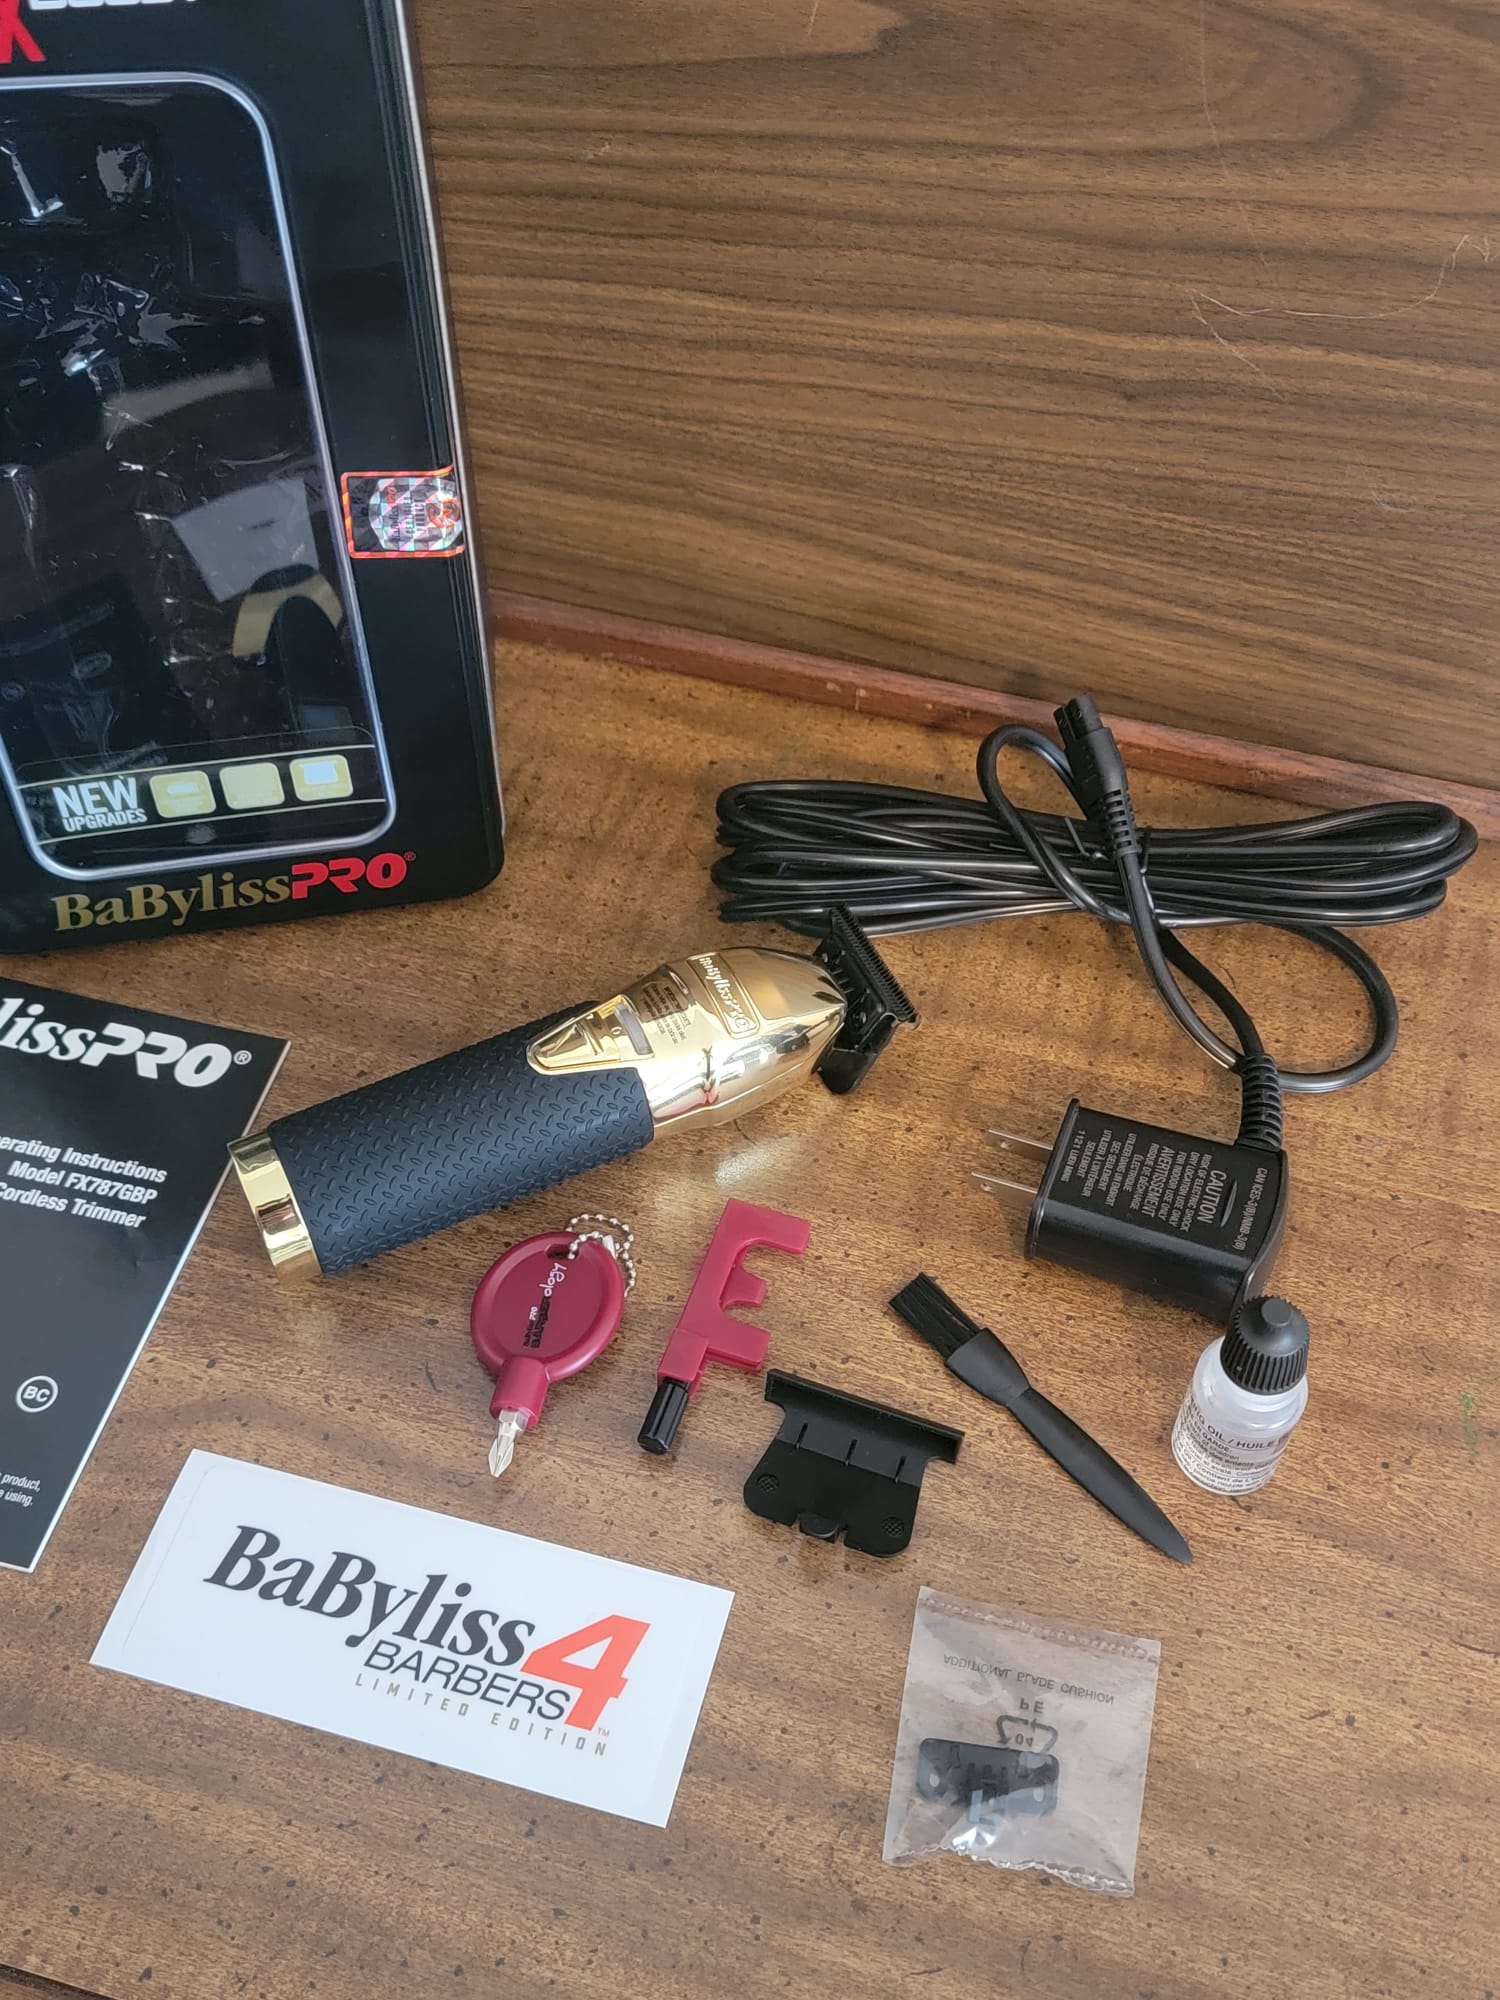 babyliss-boost_modelfx787gbp-hair-trimmer-goldfx-metal-lithium-golden with accesories